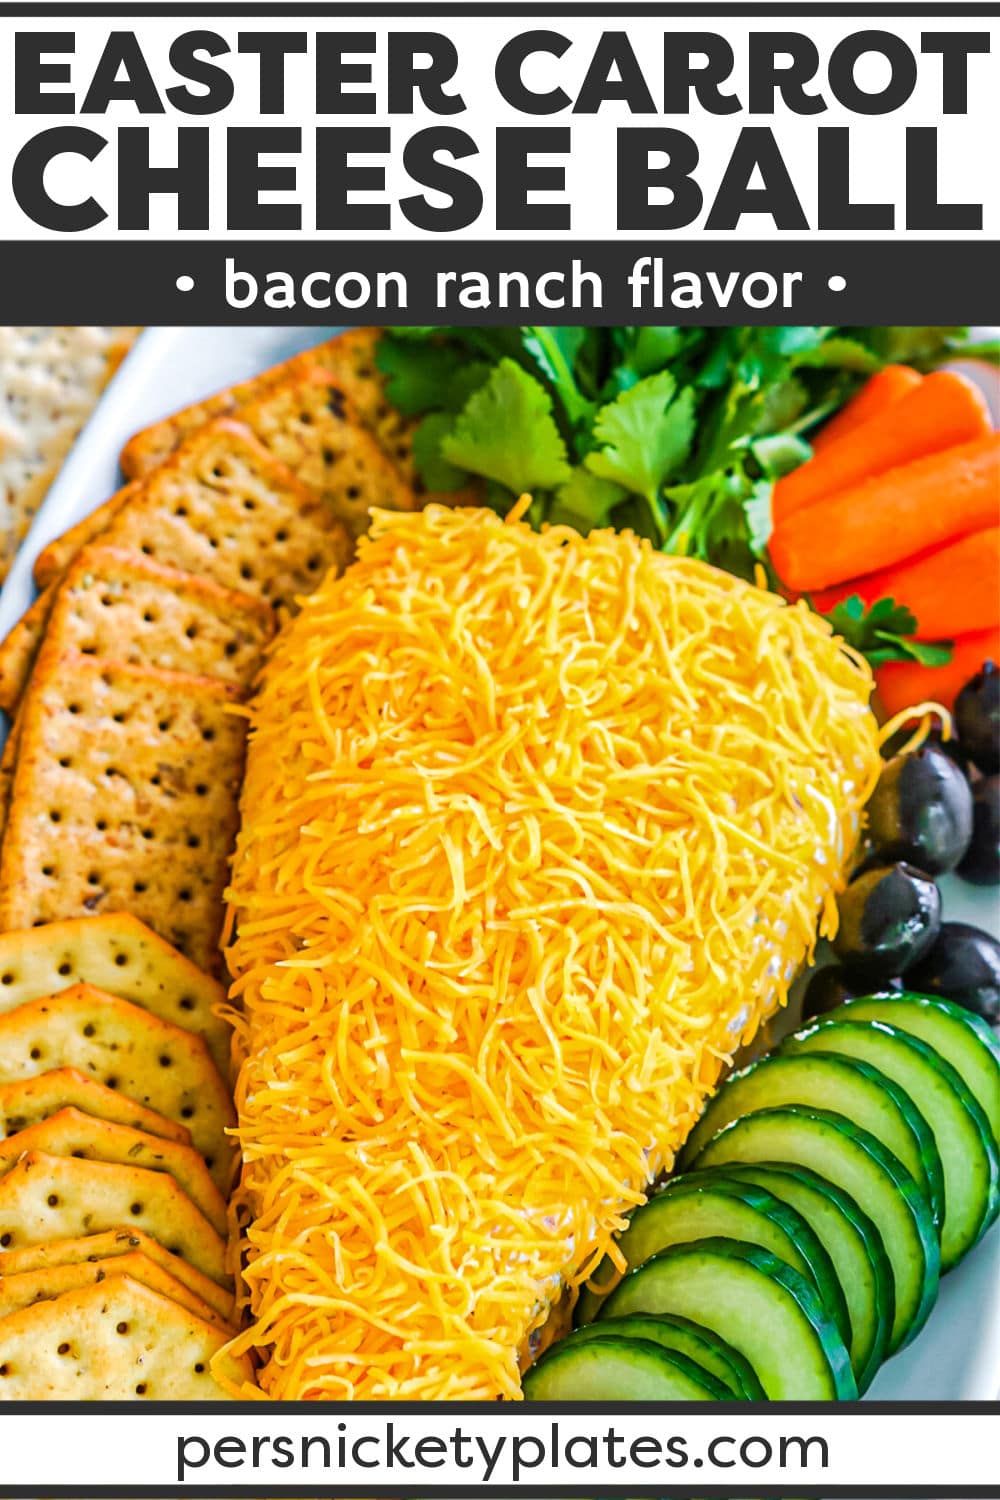 This playful Easter cheese ball is made with just 6 ingredients including cream cheese, cheddar, bacon, ranch seasoning mix, and Worcestershire sauce. Formed into the shape of a carrot, sprinkled with cheese, and finished off with fresh leafy greens for the carrot top, this adorable appetizer is colorful, fun, and delicious with crackers!